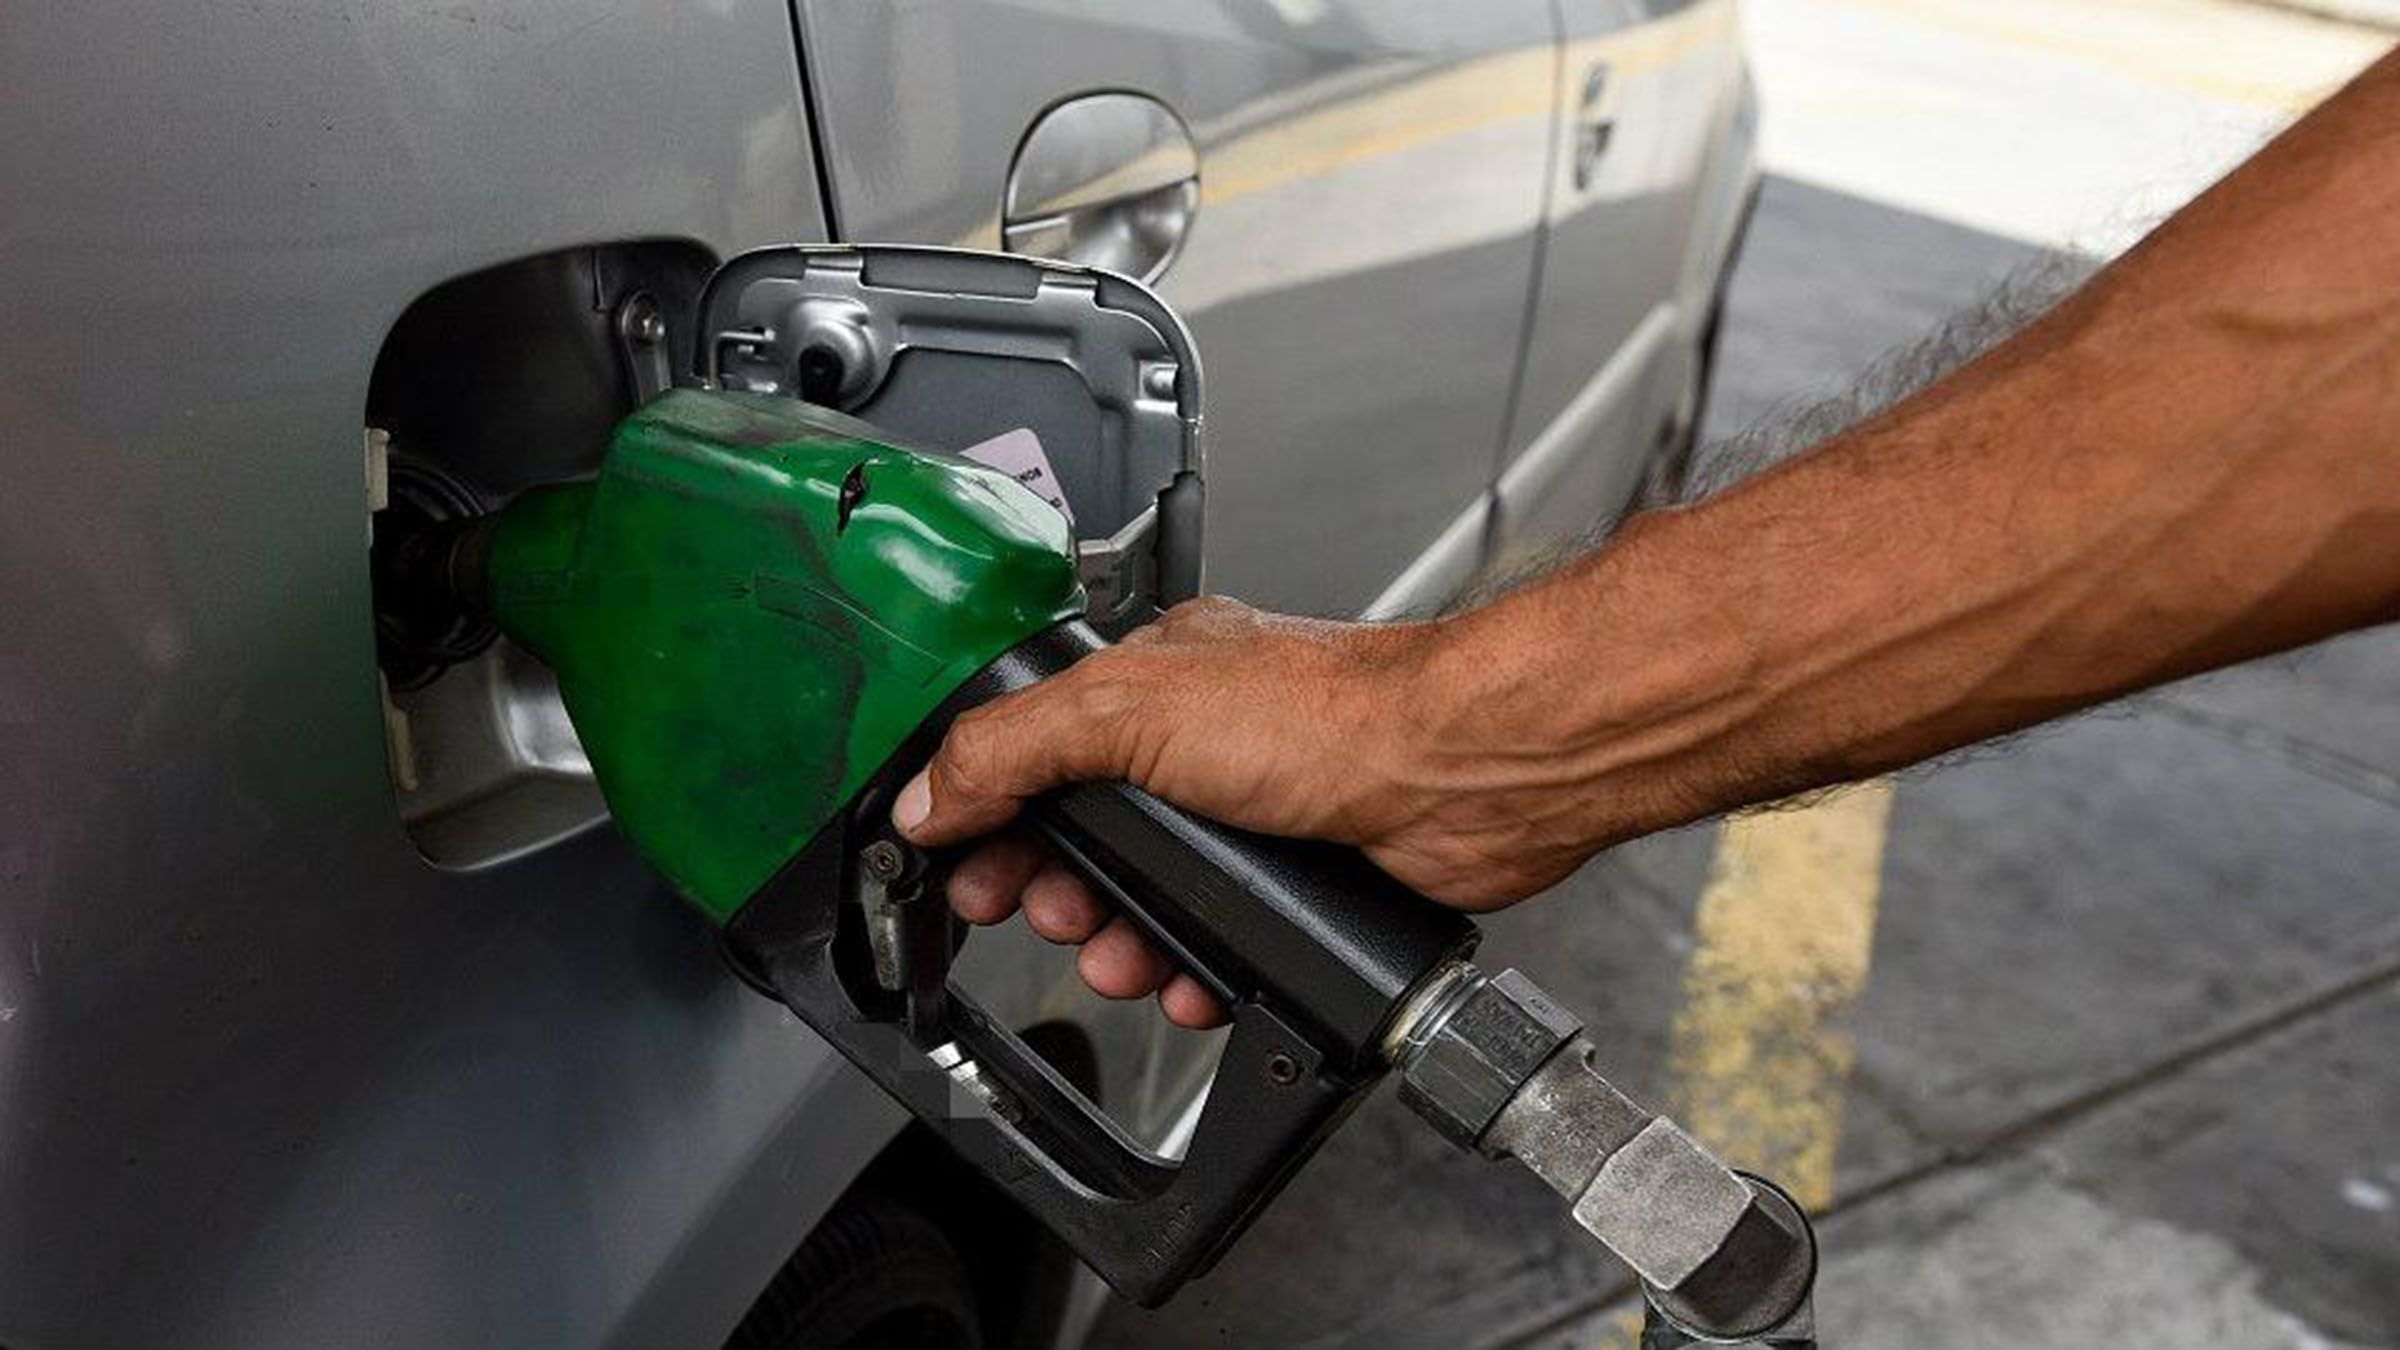 Another round of rollback for fuel prices